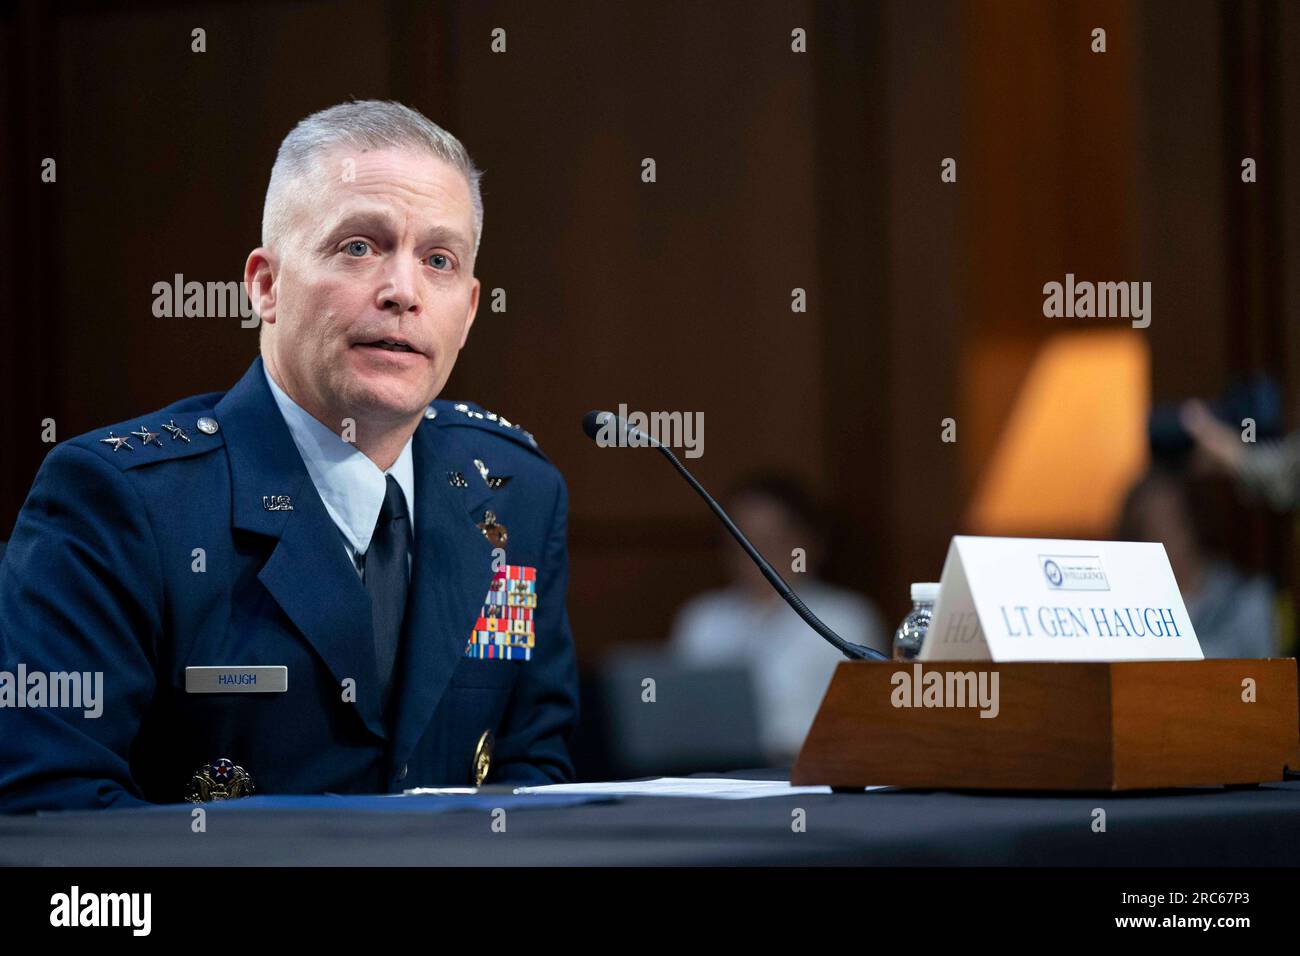 Washington, United States. 12th July, 2023. Air Force Lt. Gen. Timothy Haugh testifies during a Senate Select Intelligence Committee hearing on his nomination to be director of the National Security Agency at the U.S. Capitol in Washington, DC on Wednesday, July 12, 2023. Photo by Bonnie Cash/UPI. Credit: UPI/Alamy Live News Stock Photo